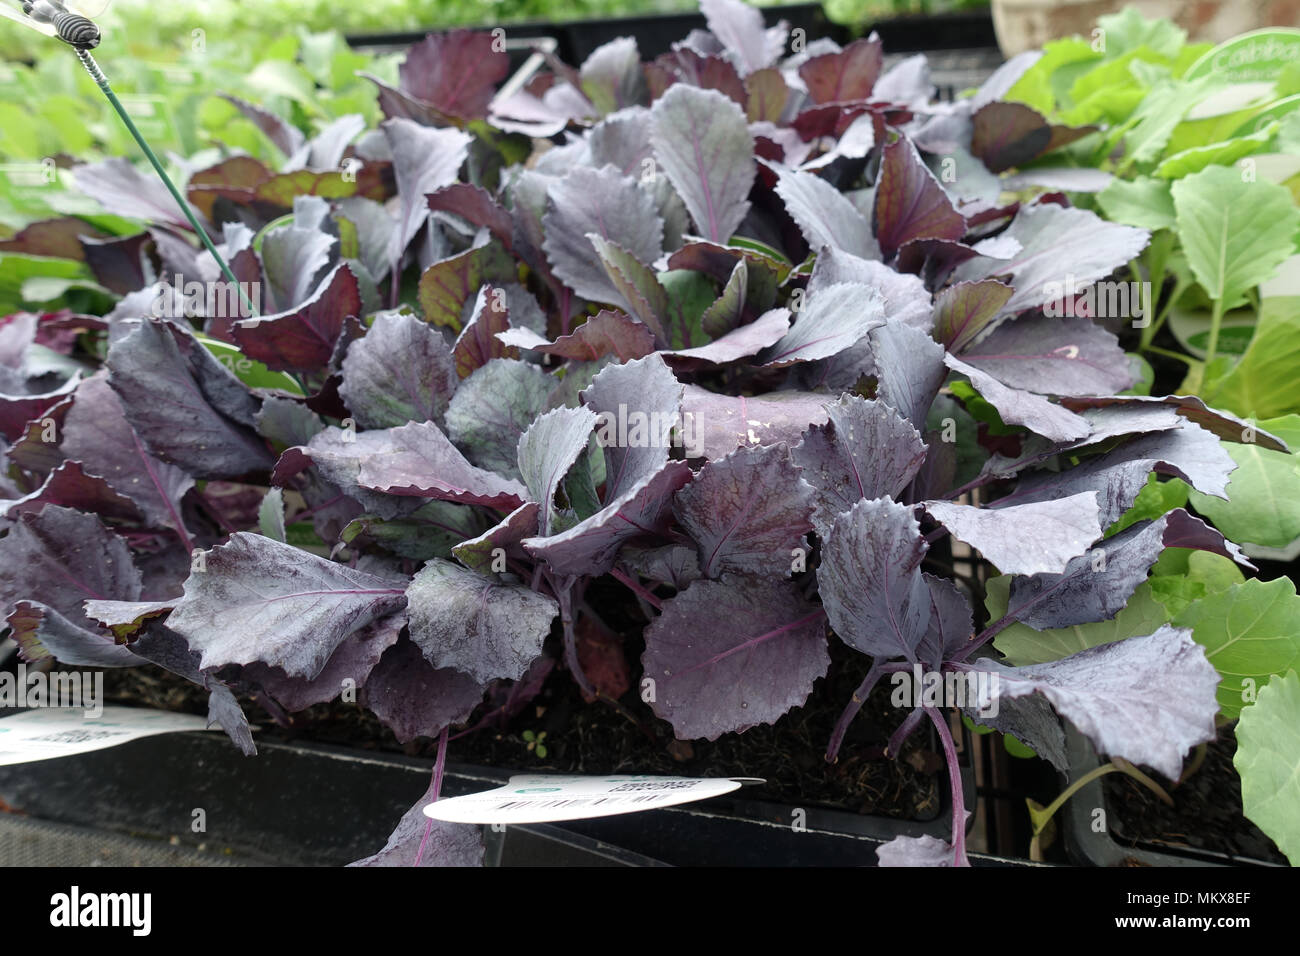 Brassica oleracea or known as Cabbage Baby Red Brassica oleracea or known as Cabbage Baby Red Stock Photo